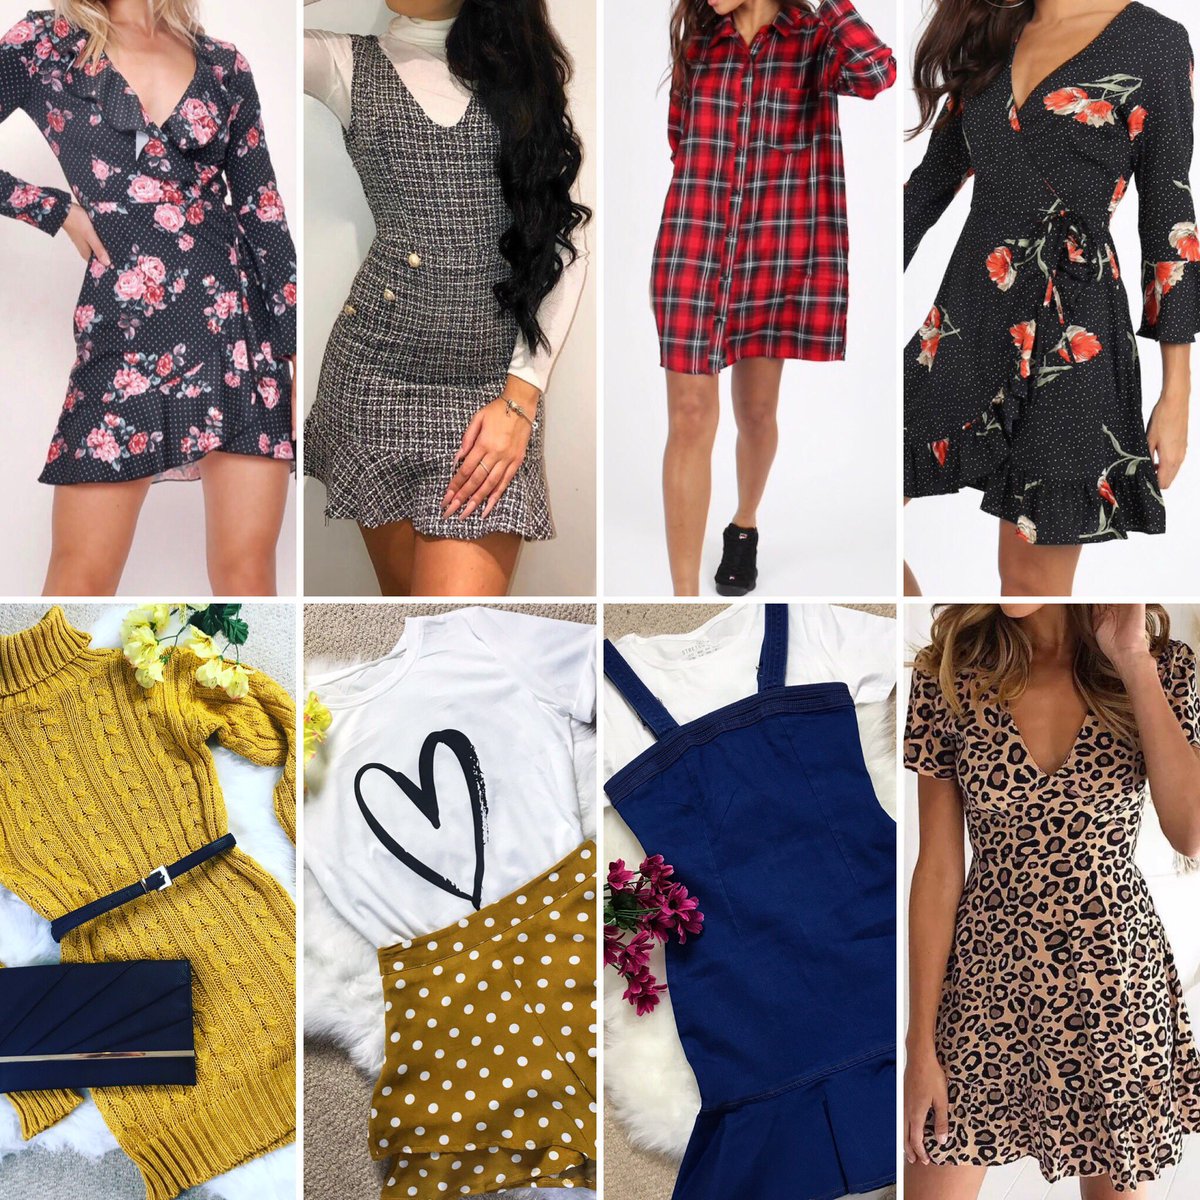 Some of my StyleFairy Faves 😍
Pm to Order! 💕#stylefairy #boutique #clothing #fashion #womensfashion #affordablefashion #fashionforless #mystyle #mylook #faves #dresses #newin #look #like #love #ootd #outfitgoals #inspo #whattowear #girls #follow #rt